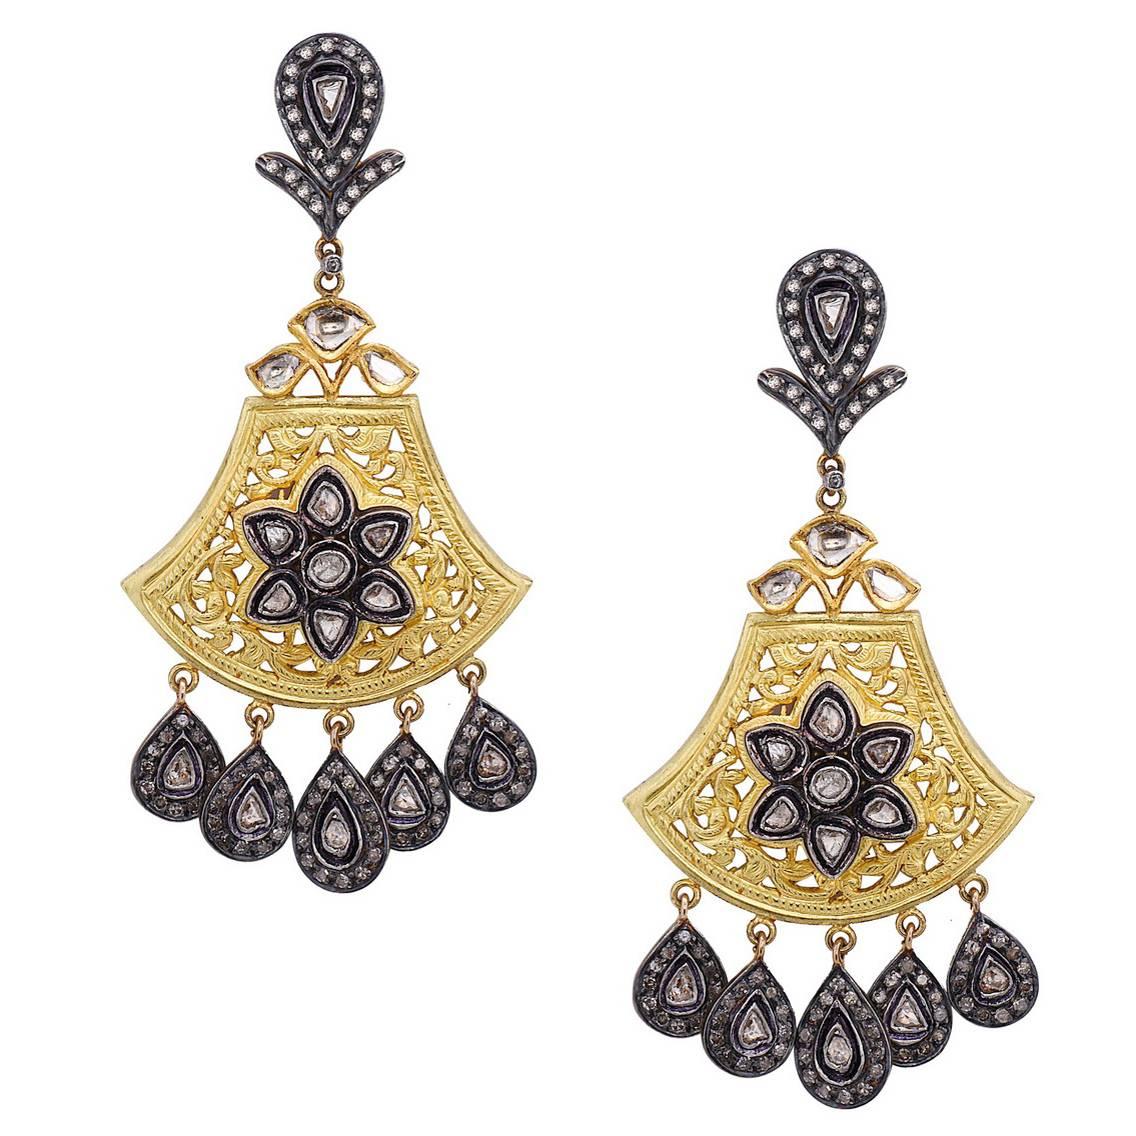 Rose Cut Diamond Dangle Earrings With Filigree Work Made In 14k Gold & Silver For Sale